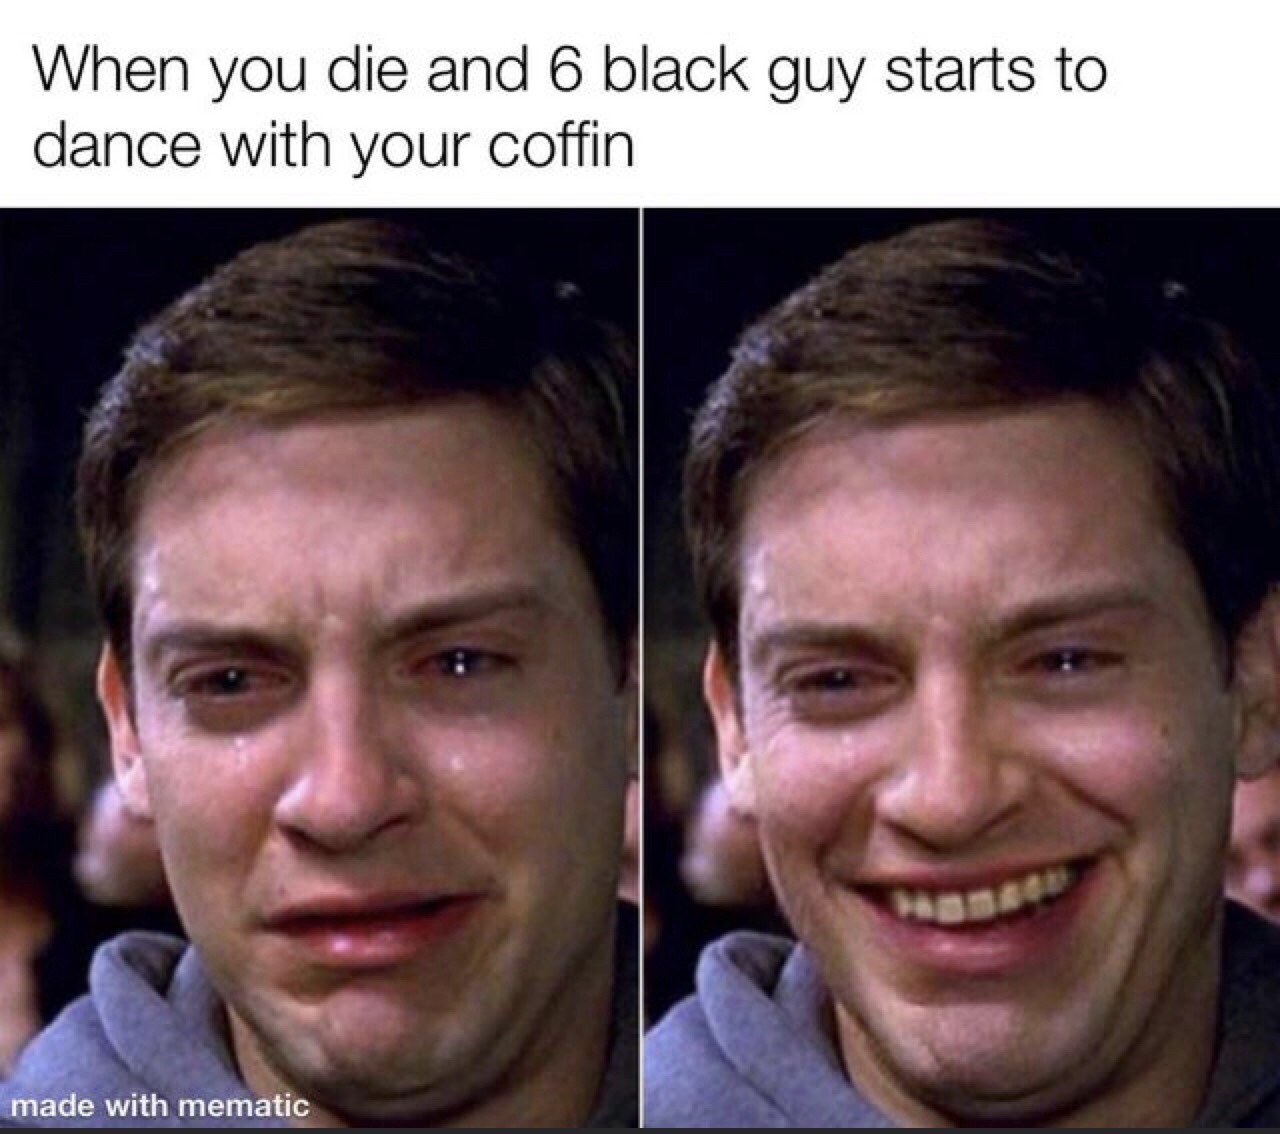 crying peter parker - When you die and 6 black guy starts to dance with your coffin made with mematic